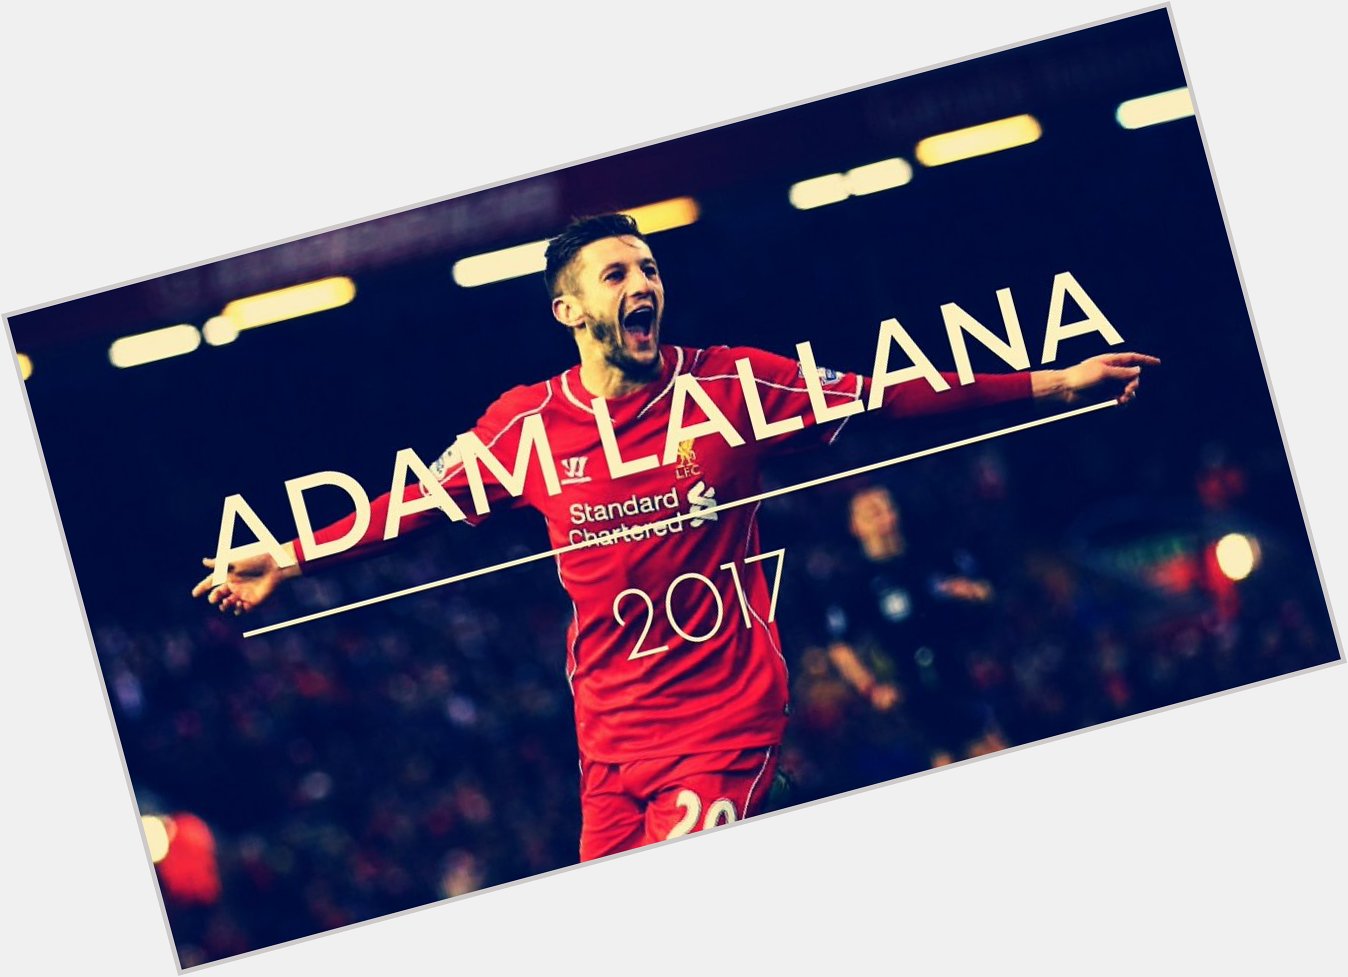 Happy birthday, Adam lallana and all the best 